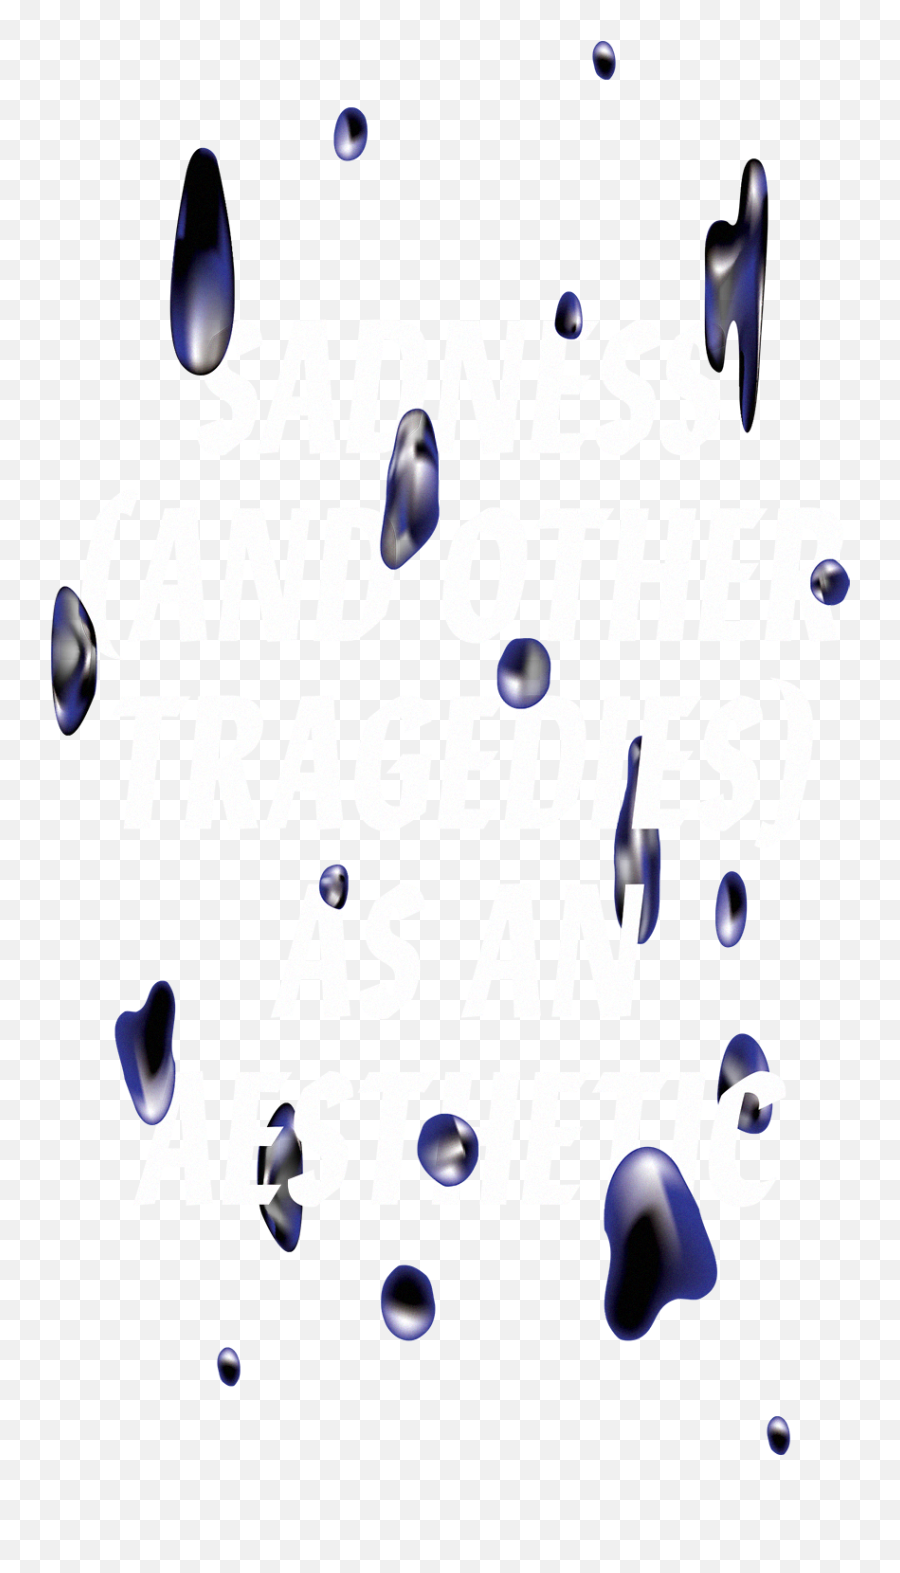 Sad Posters - Sadness And Other Tragedies As An Aesthetic Cute Sad Png Aesthetic Transparent Emoji,Emotion Poster